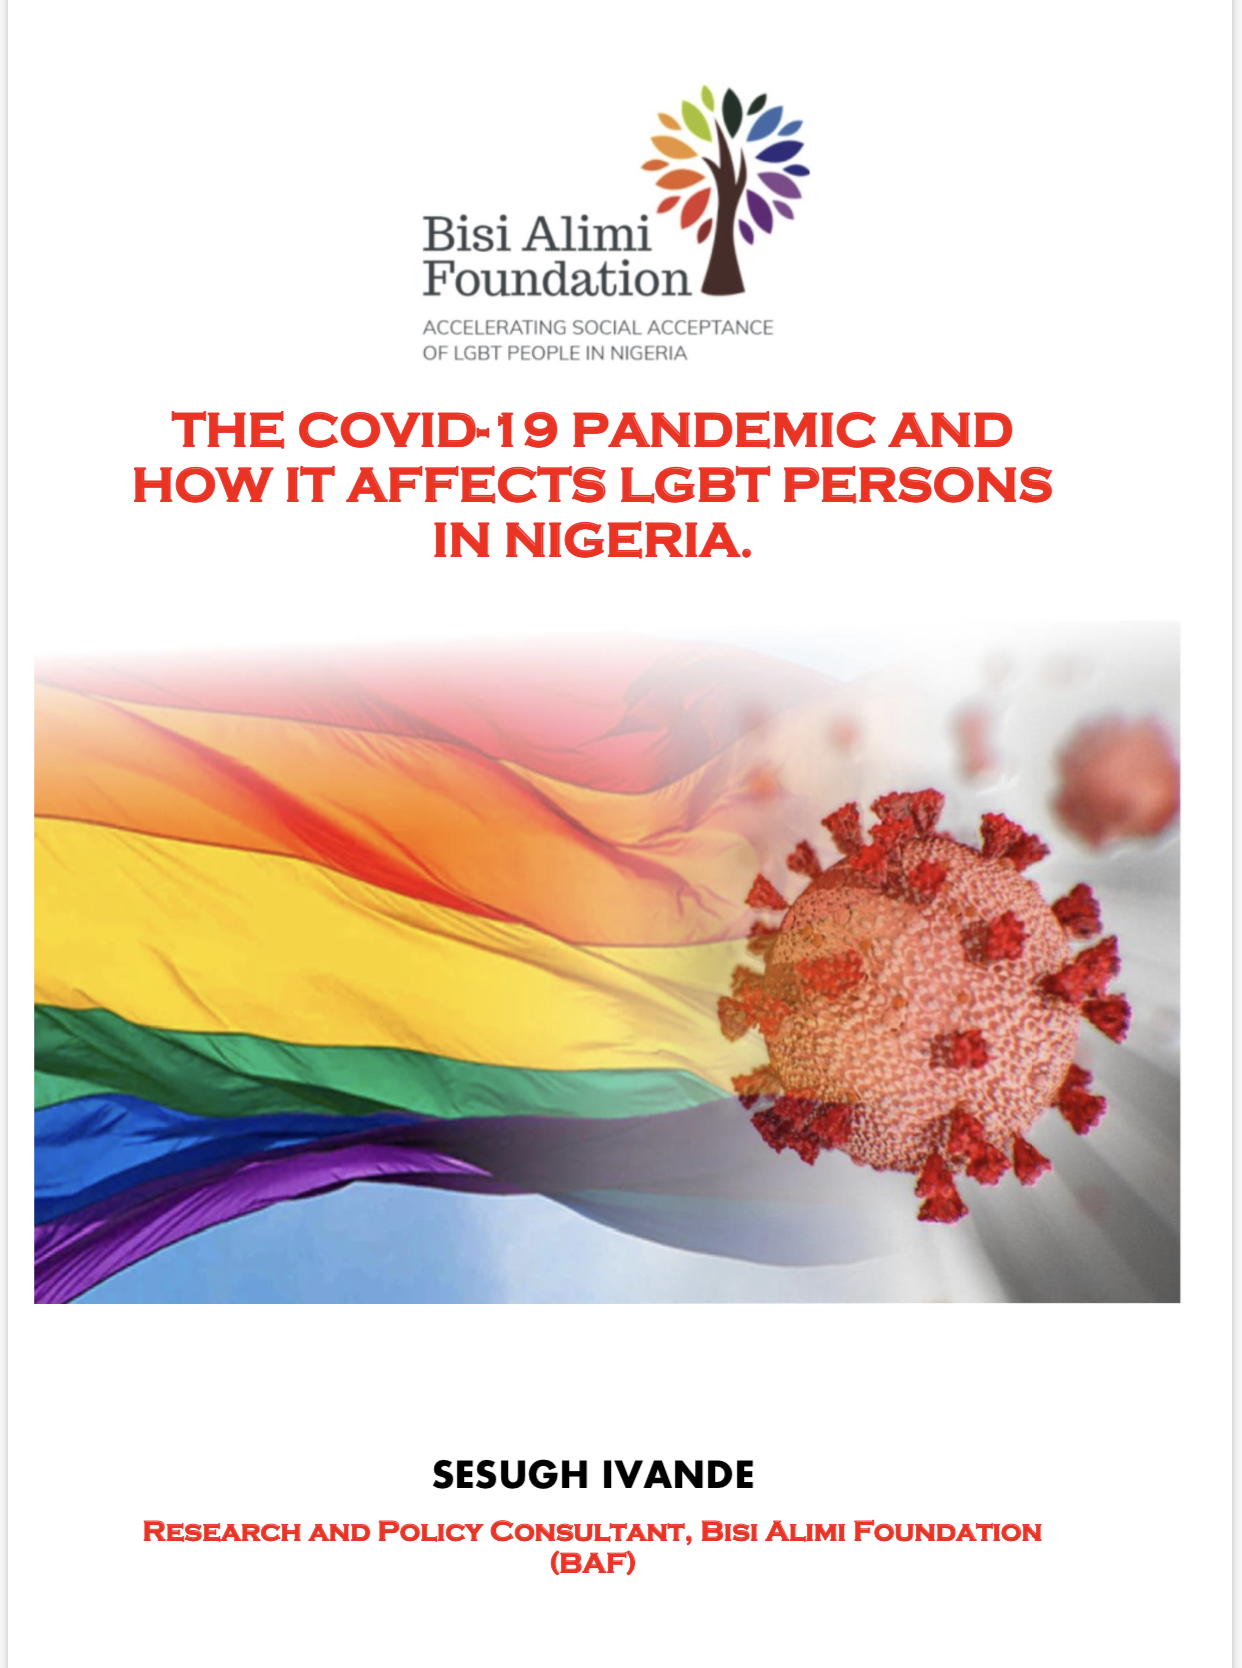 The COVID-19 Pandemic and How It Affects LGBT Persons in Nigeria